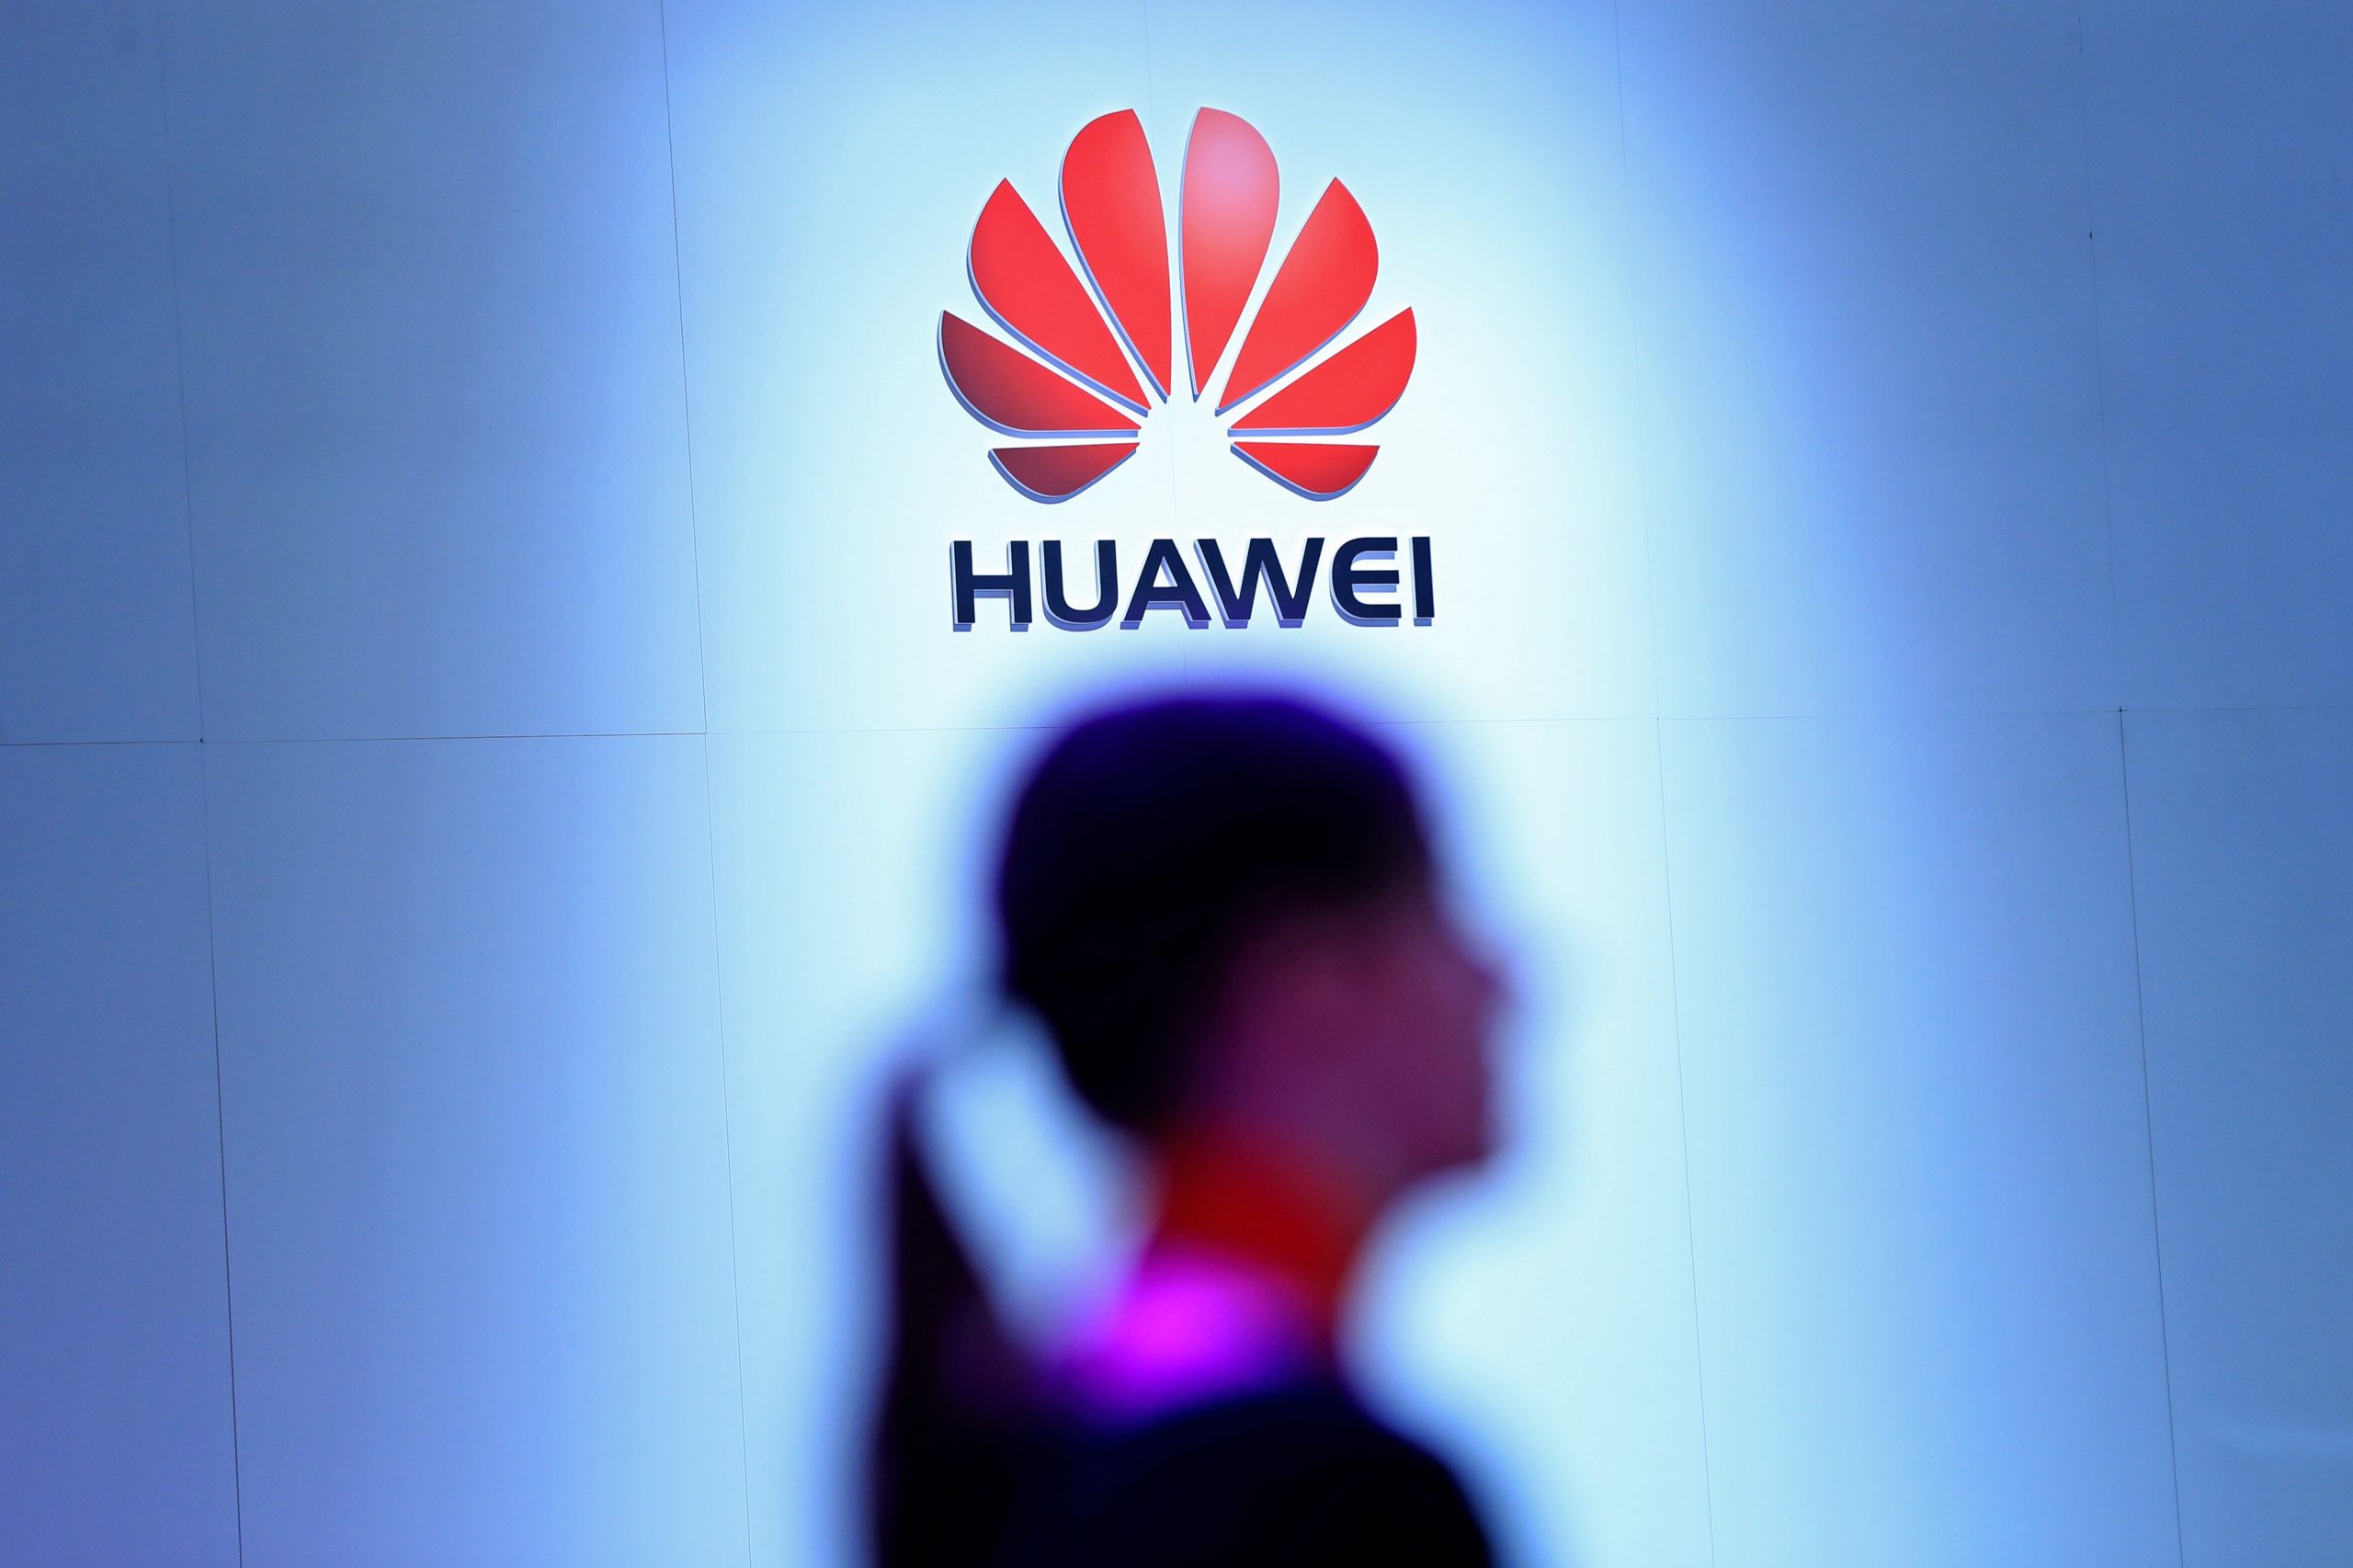 JF Tech partners with Huawei for a manufacturing venture in China